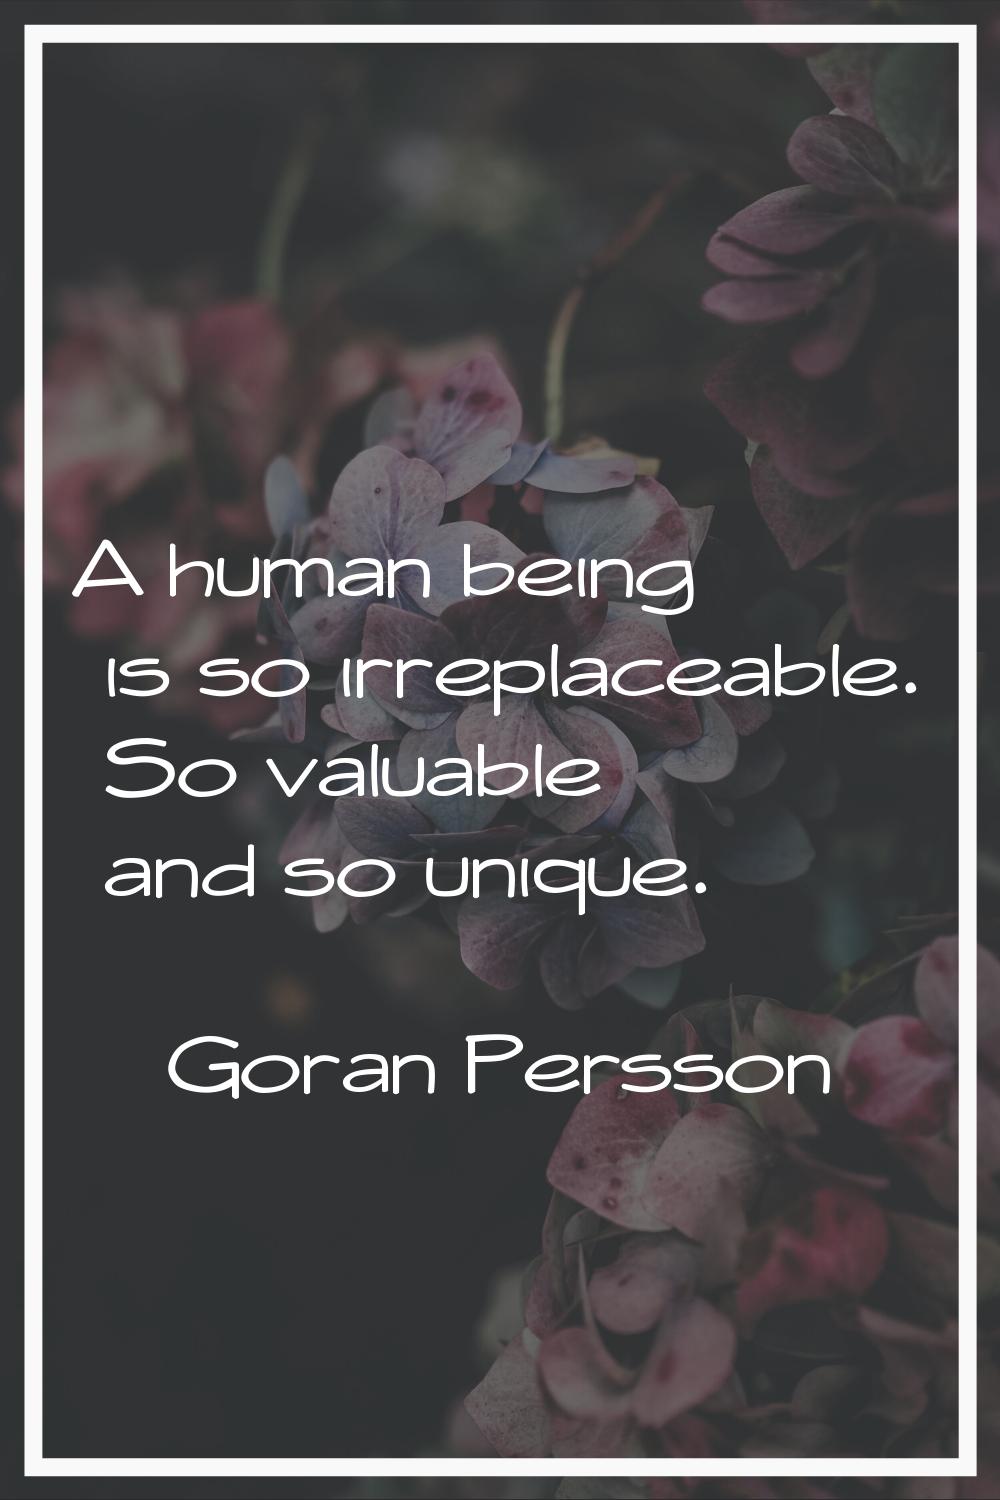 A human being is so irreplaceable. So valuable and so unique.